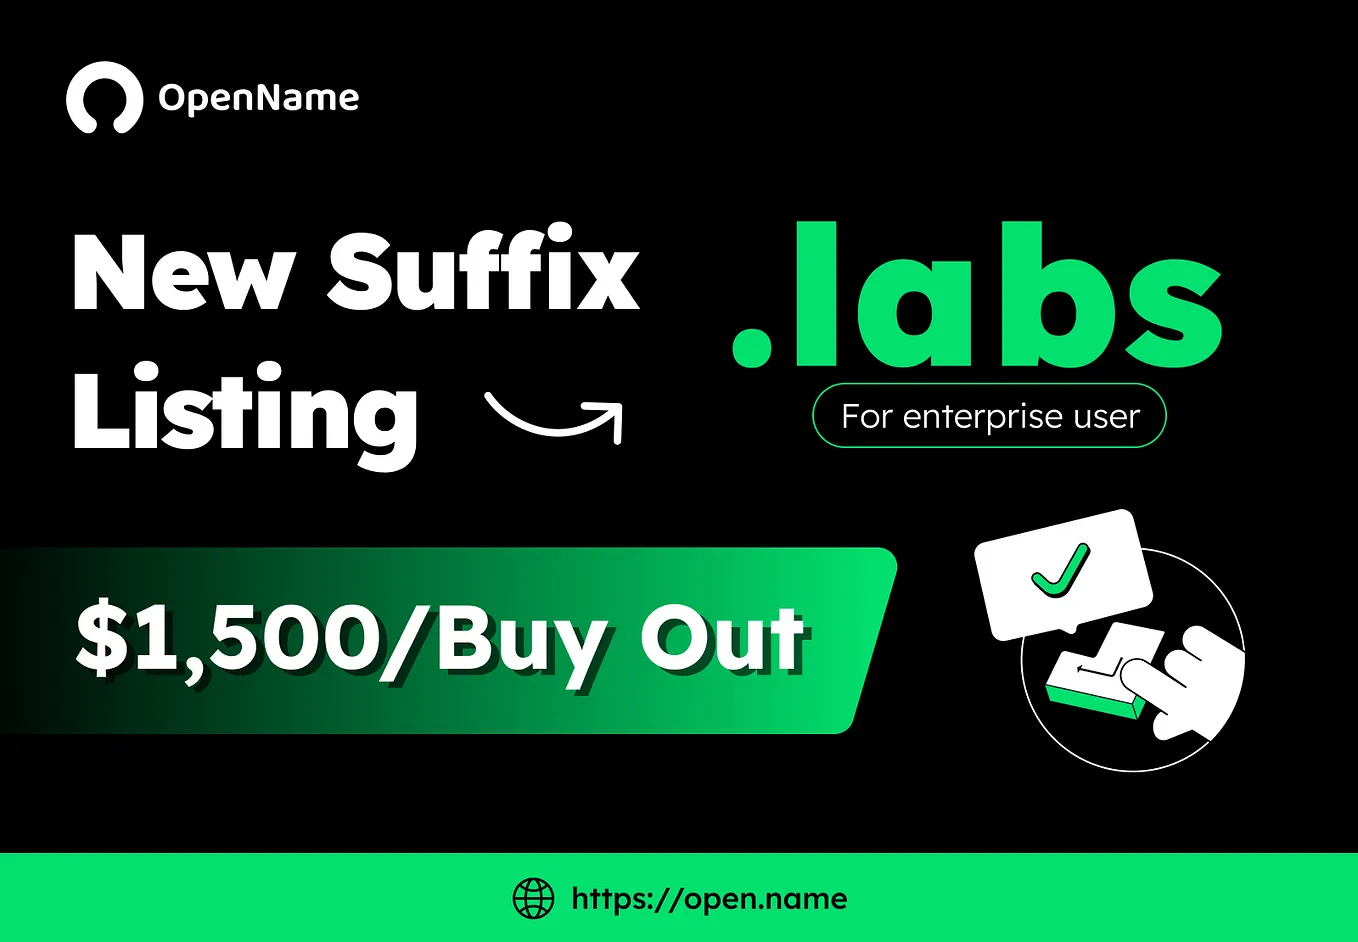 OpenName Announcement of New Suffix-.labs Listing